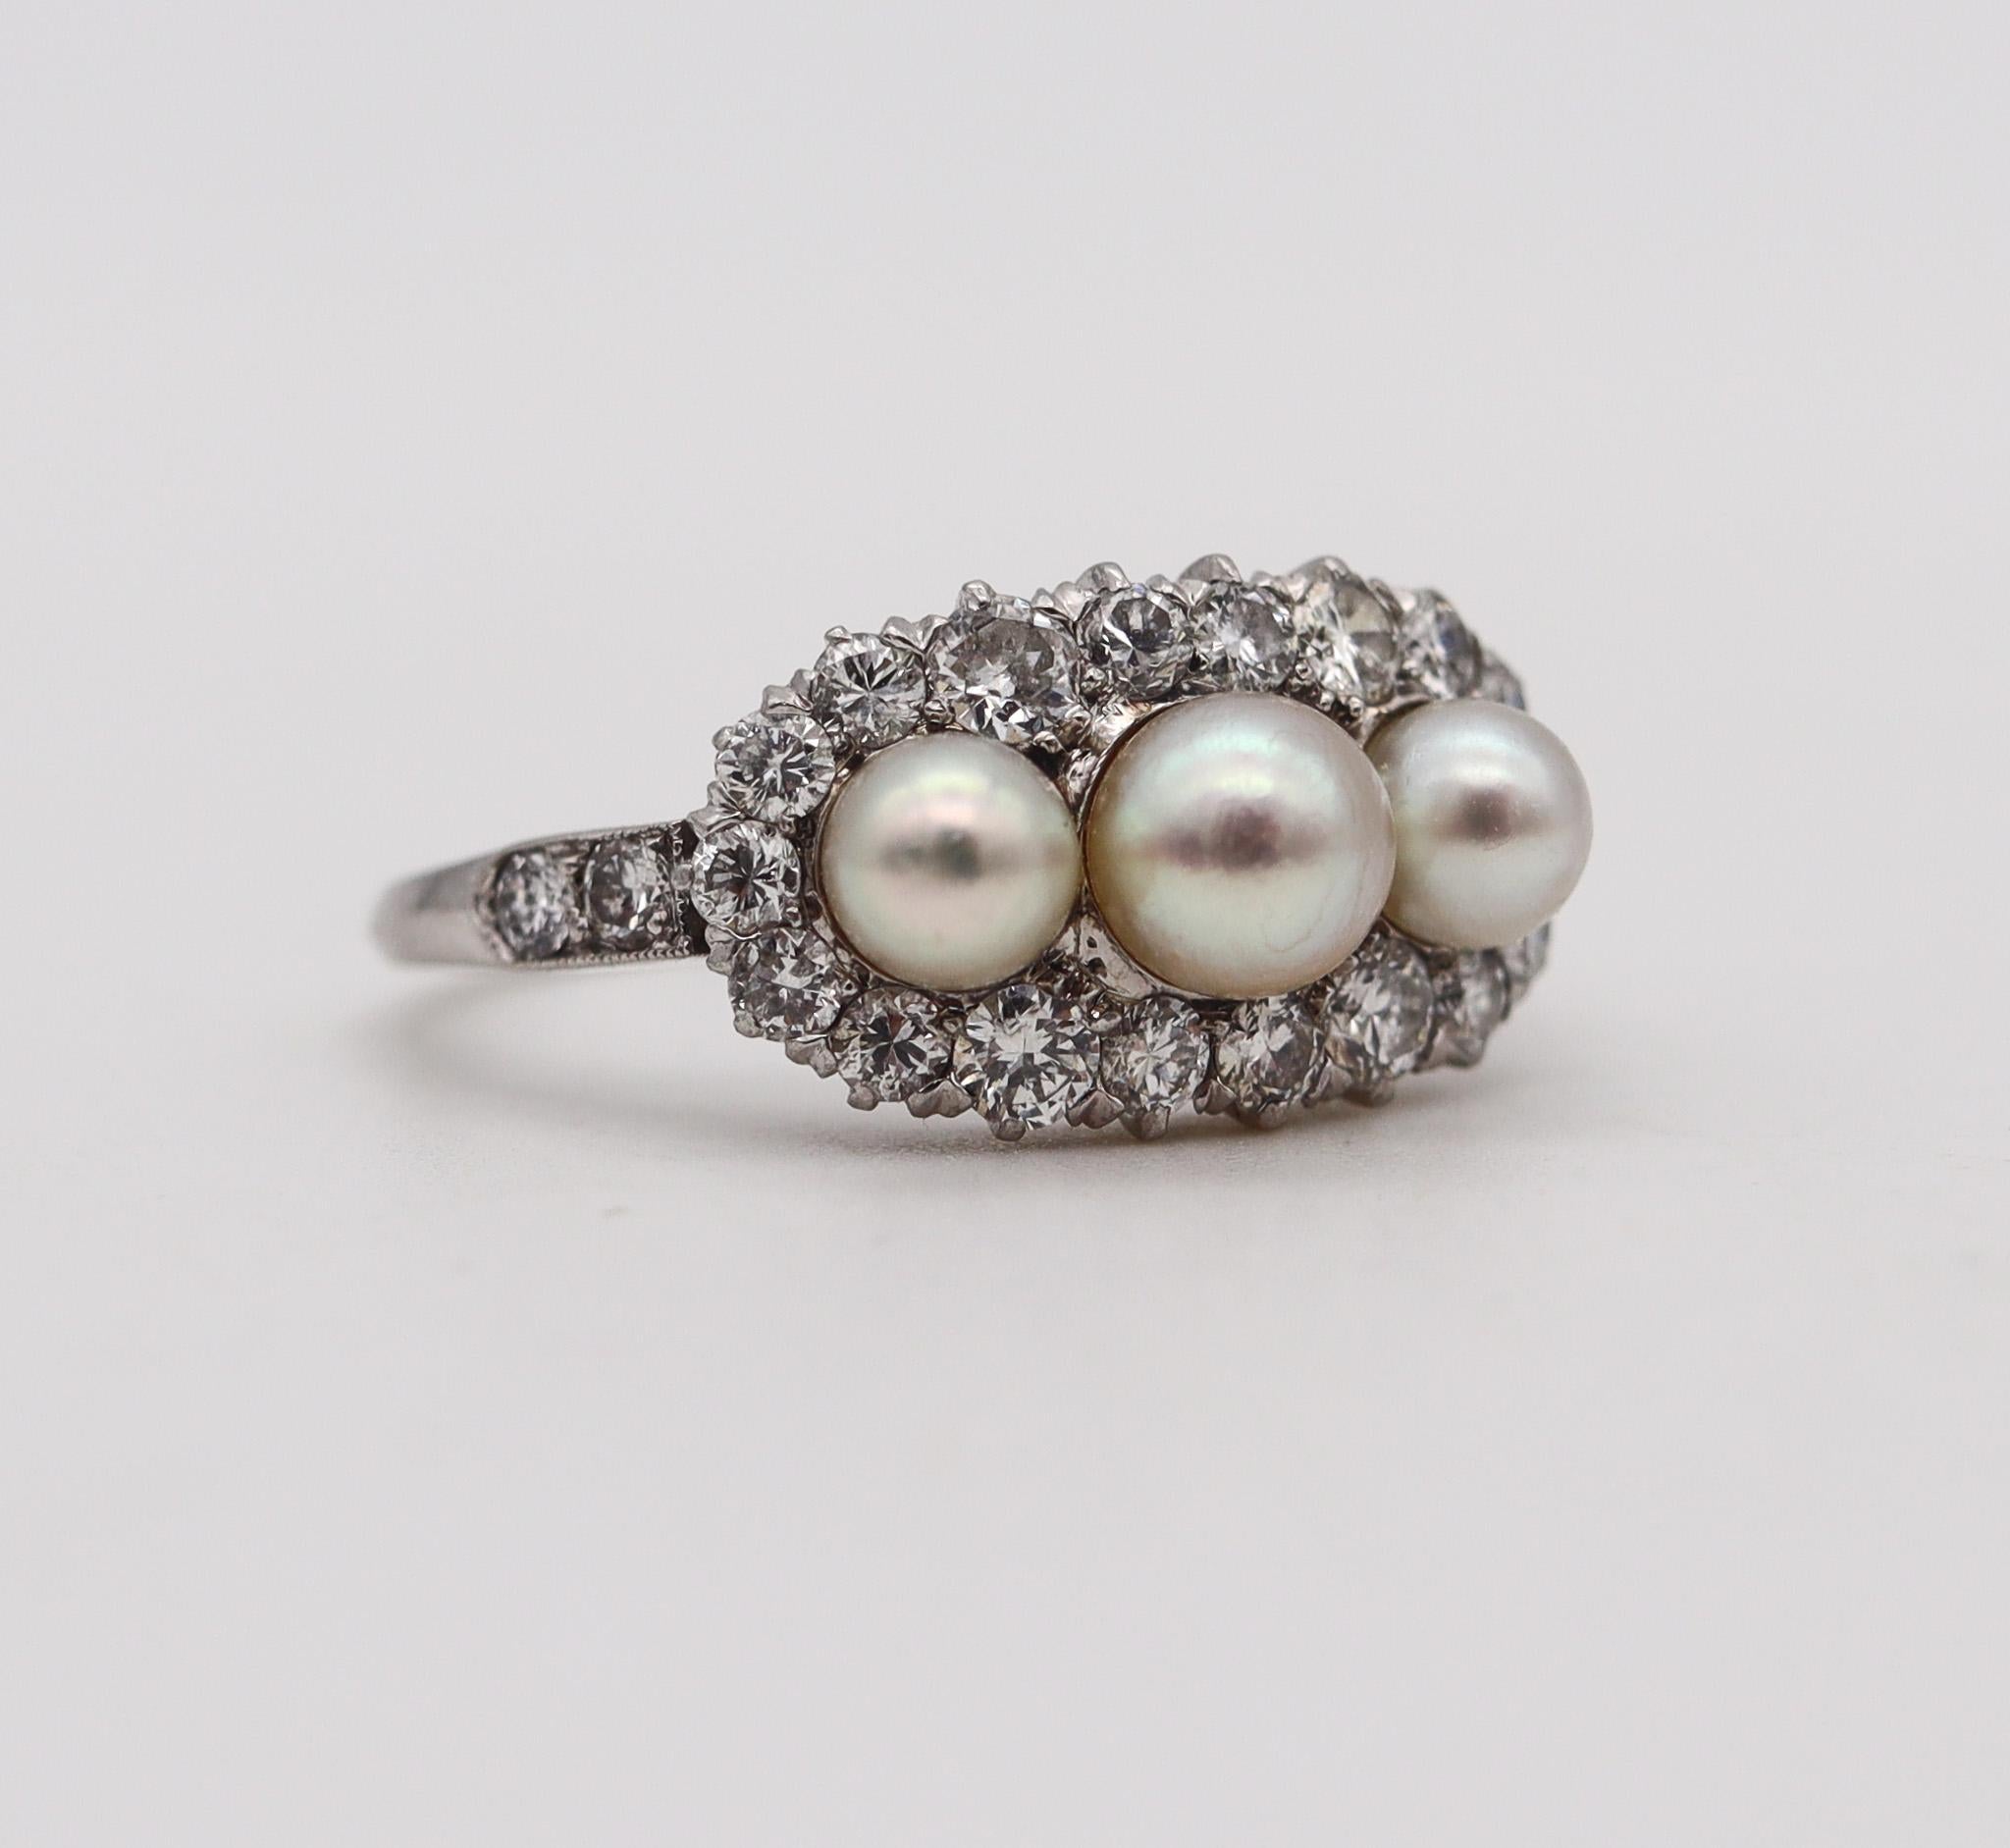 Women's Tiffany & Co. 1910 Edwardian Ring In Platinum With 1.10 Ctw In Diamonds & Pearls For Sale